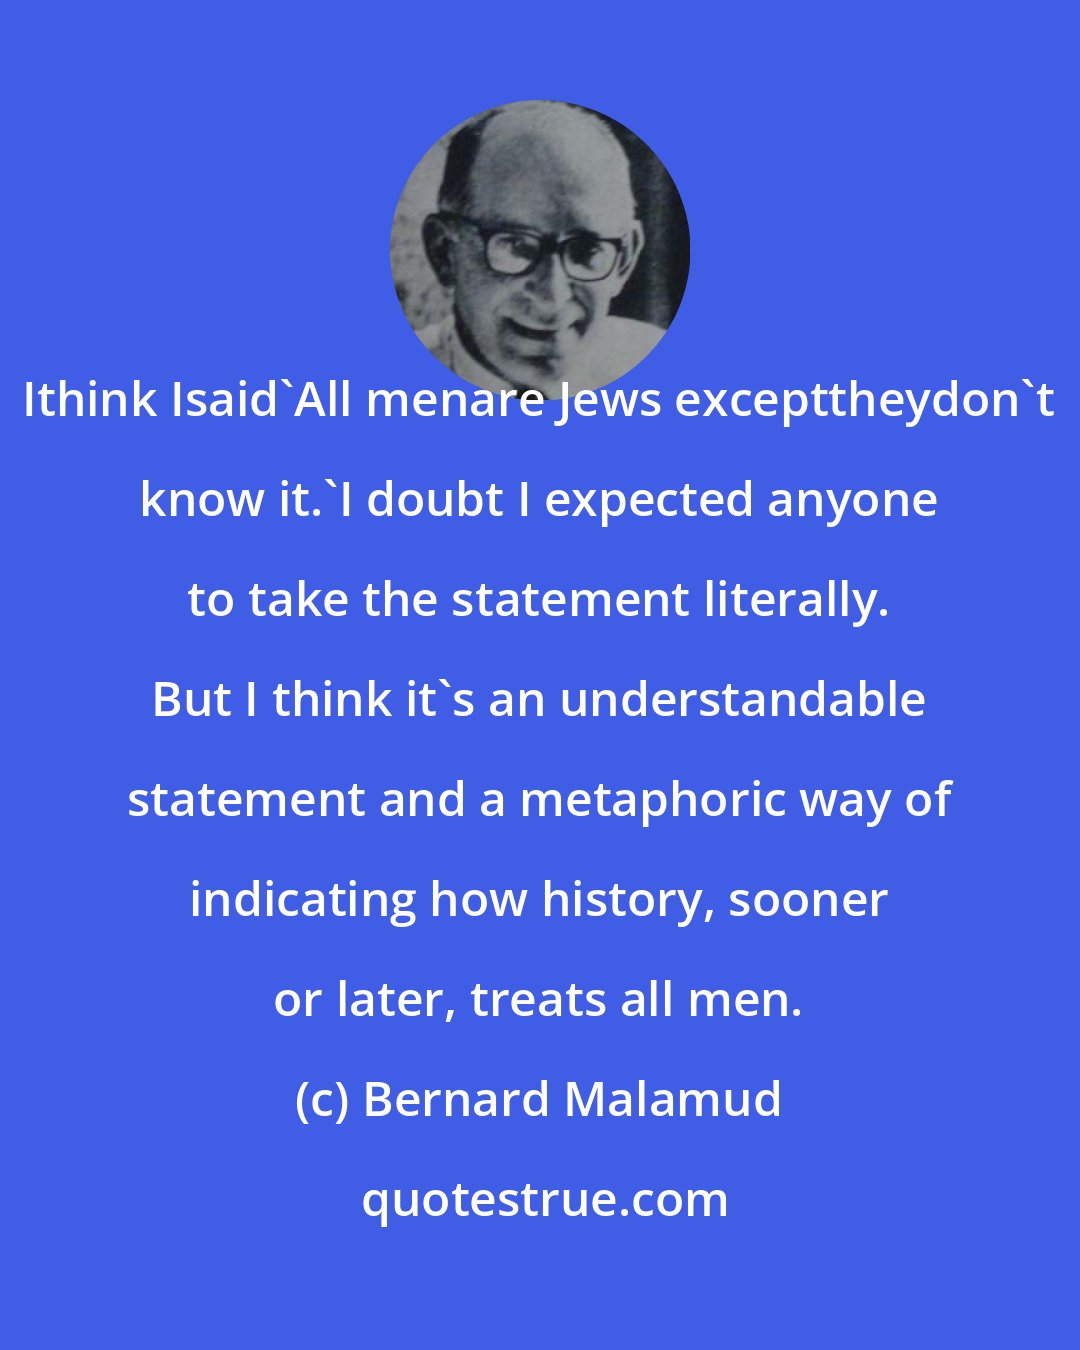 Bernard Malamud: Ithink Isaid'All menare Jews excepttheydon't know it.'I doubt I expected anyone to take the statement literally. But I think it's an understandable statement and a metaphoric way of indicating how history, sooner or later, treats all men.